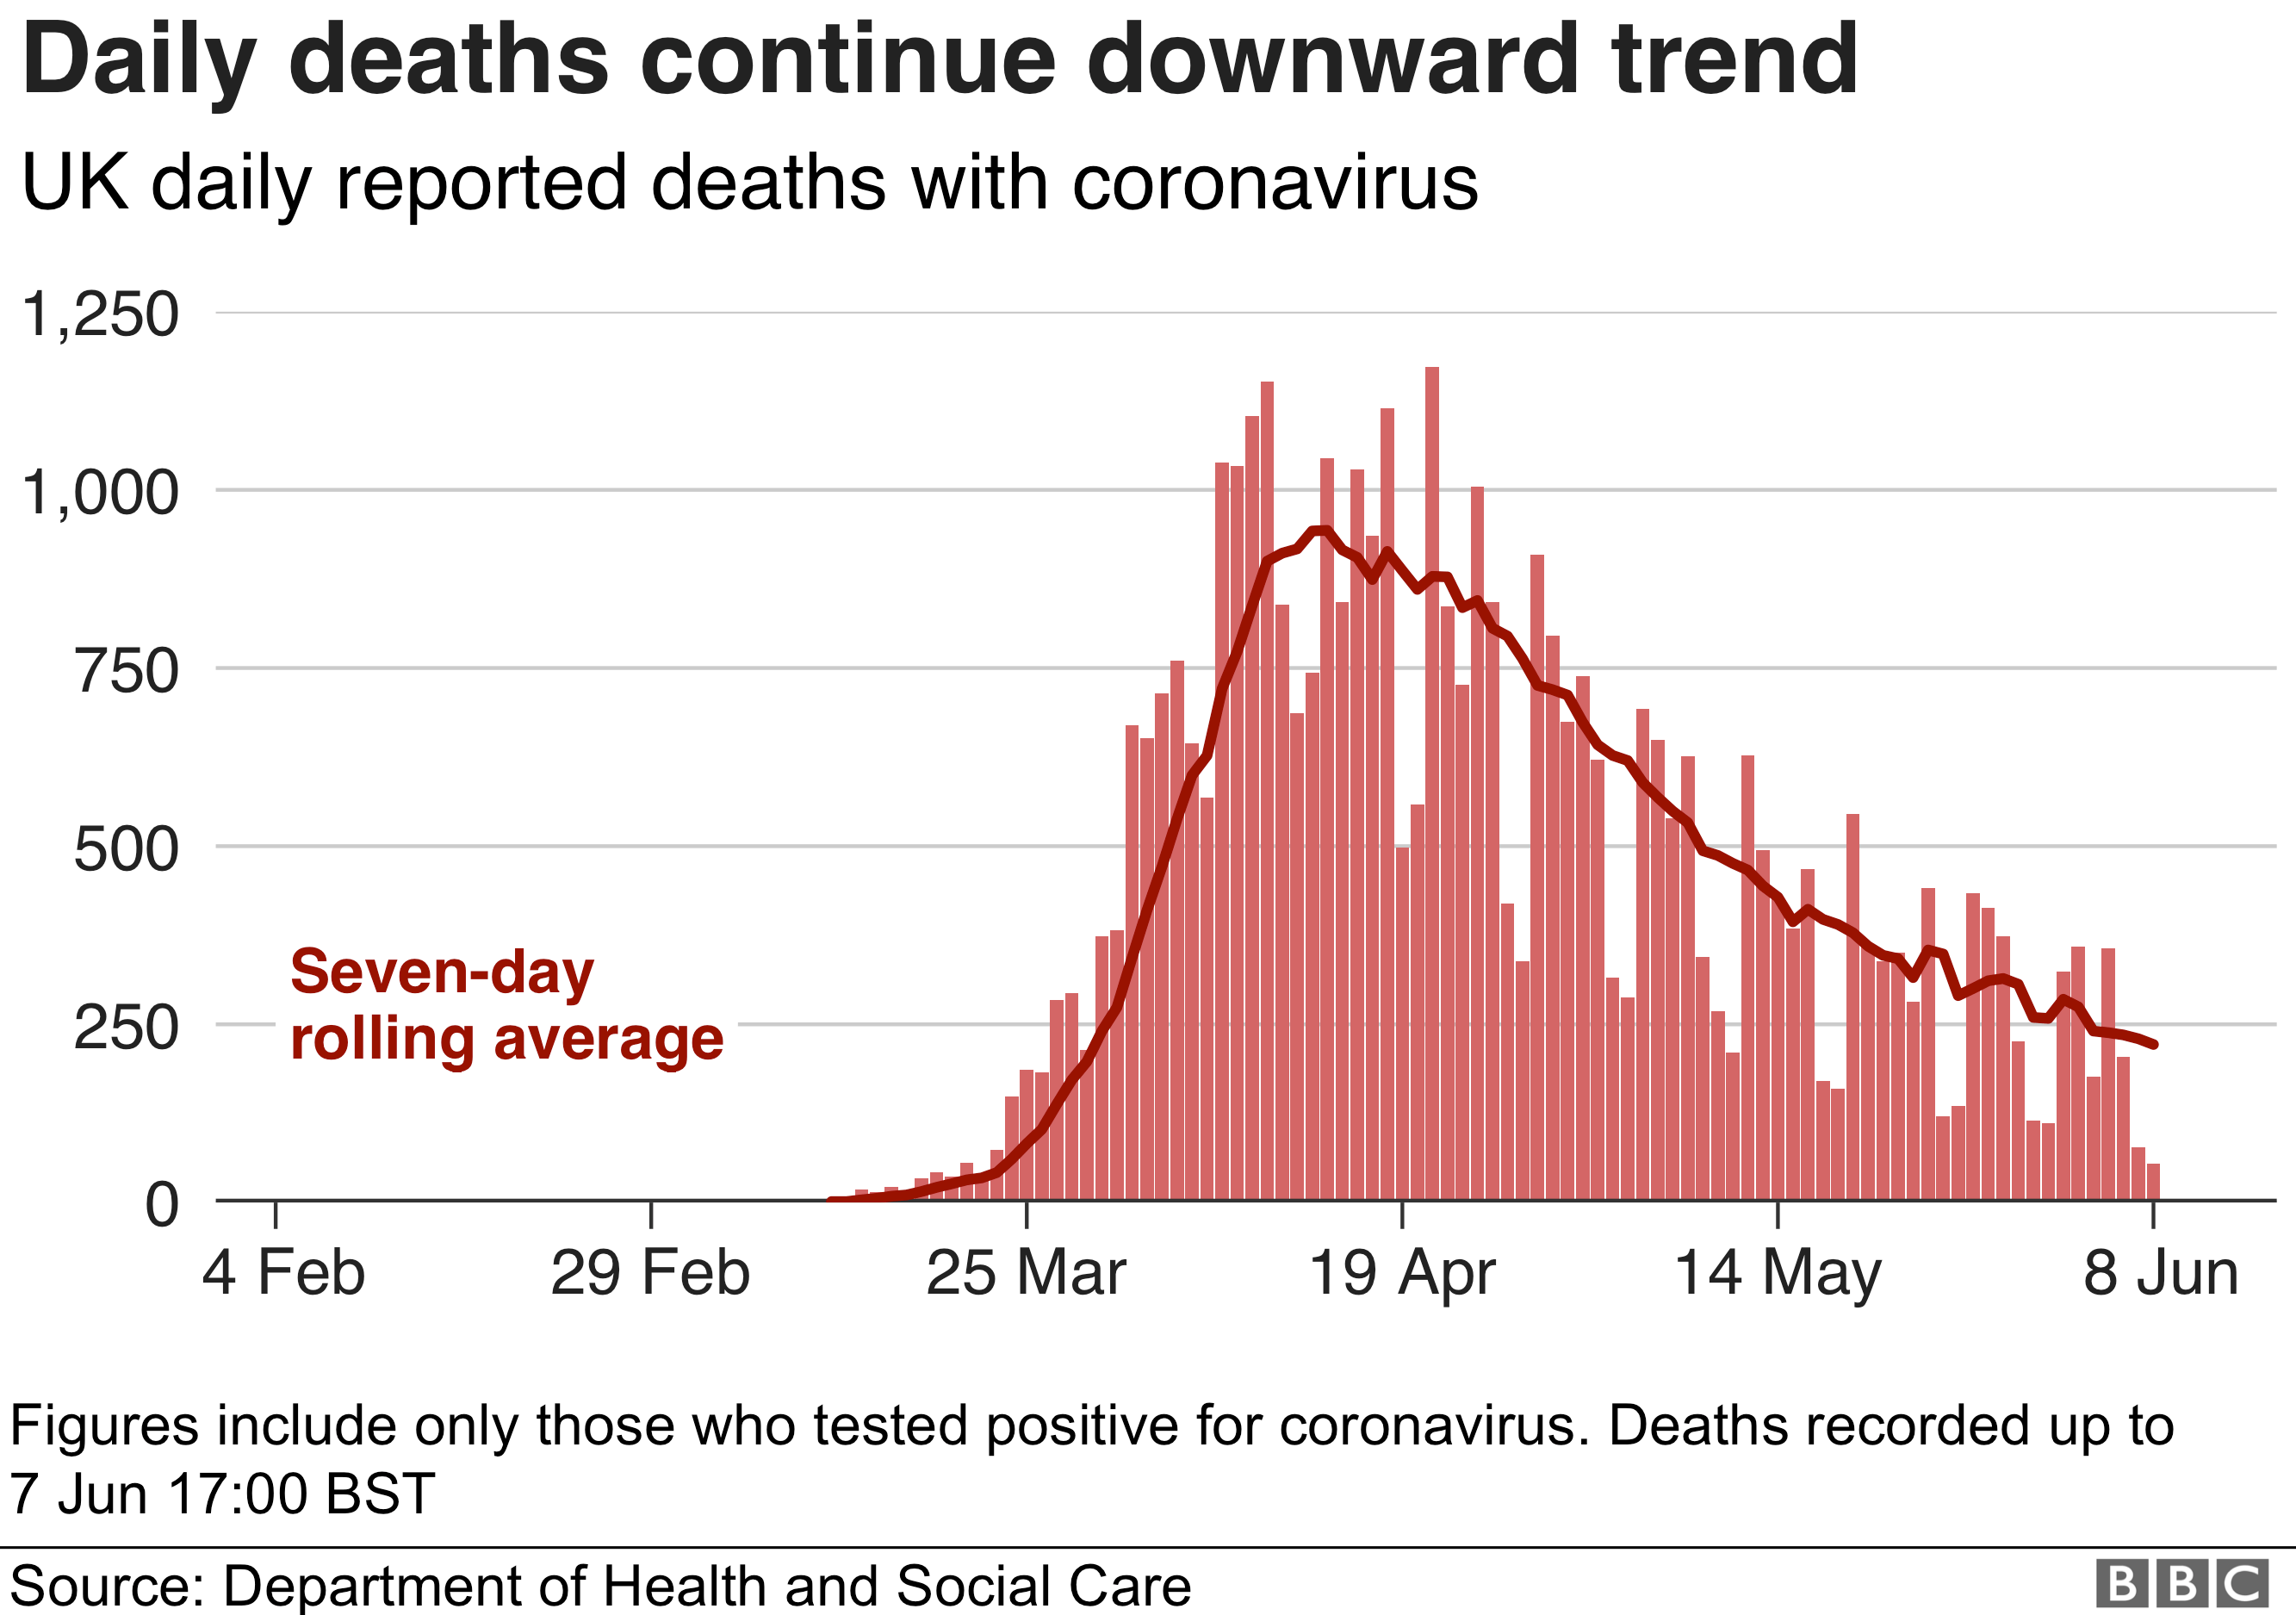 Chart shows downward trend in deaths continues, 8 June